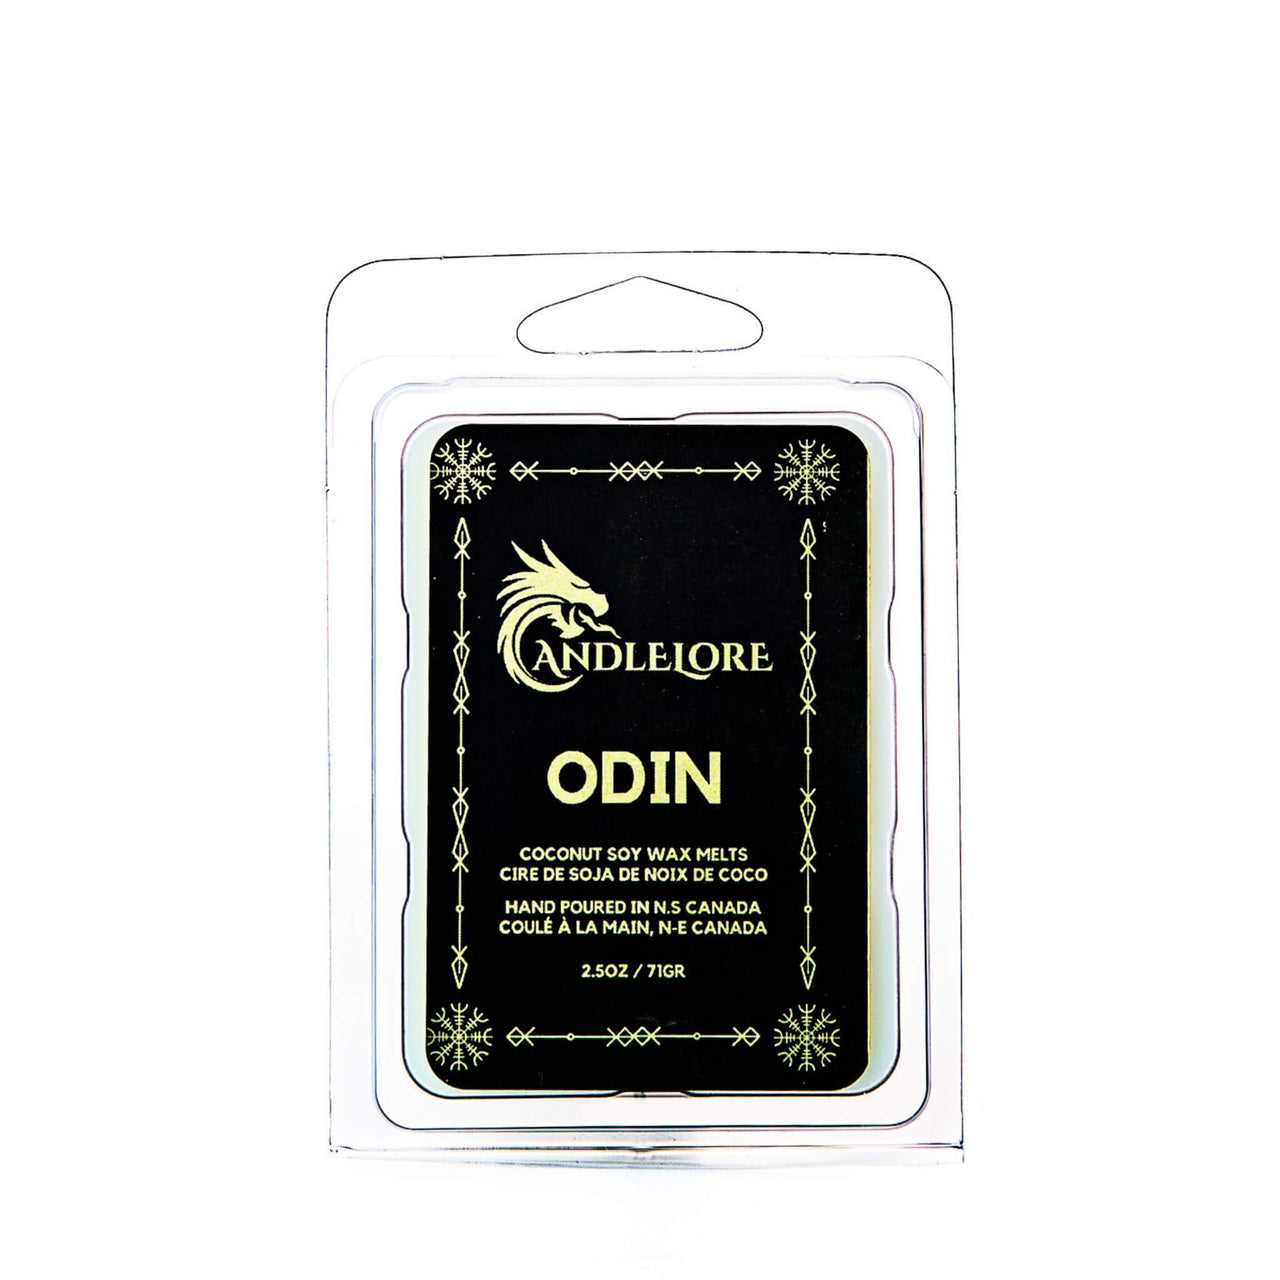 Odin Scented Wax Melts